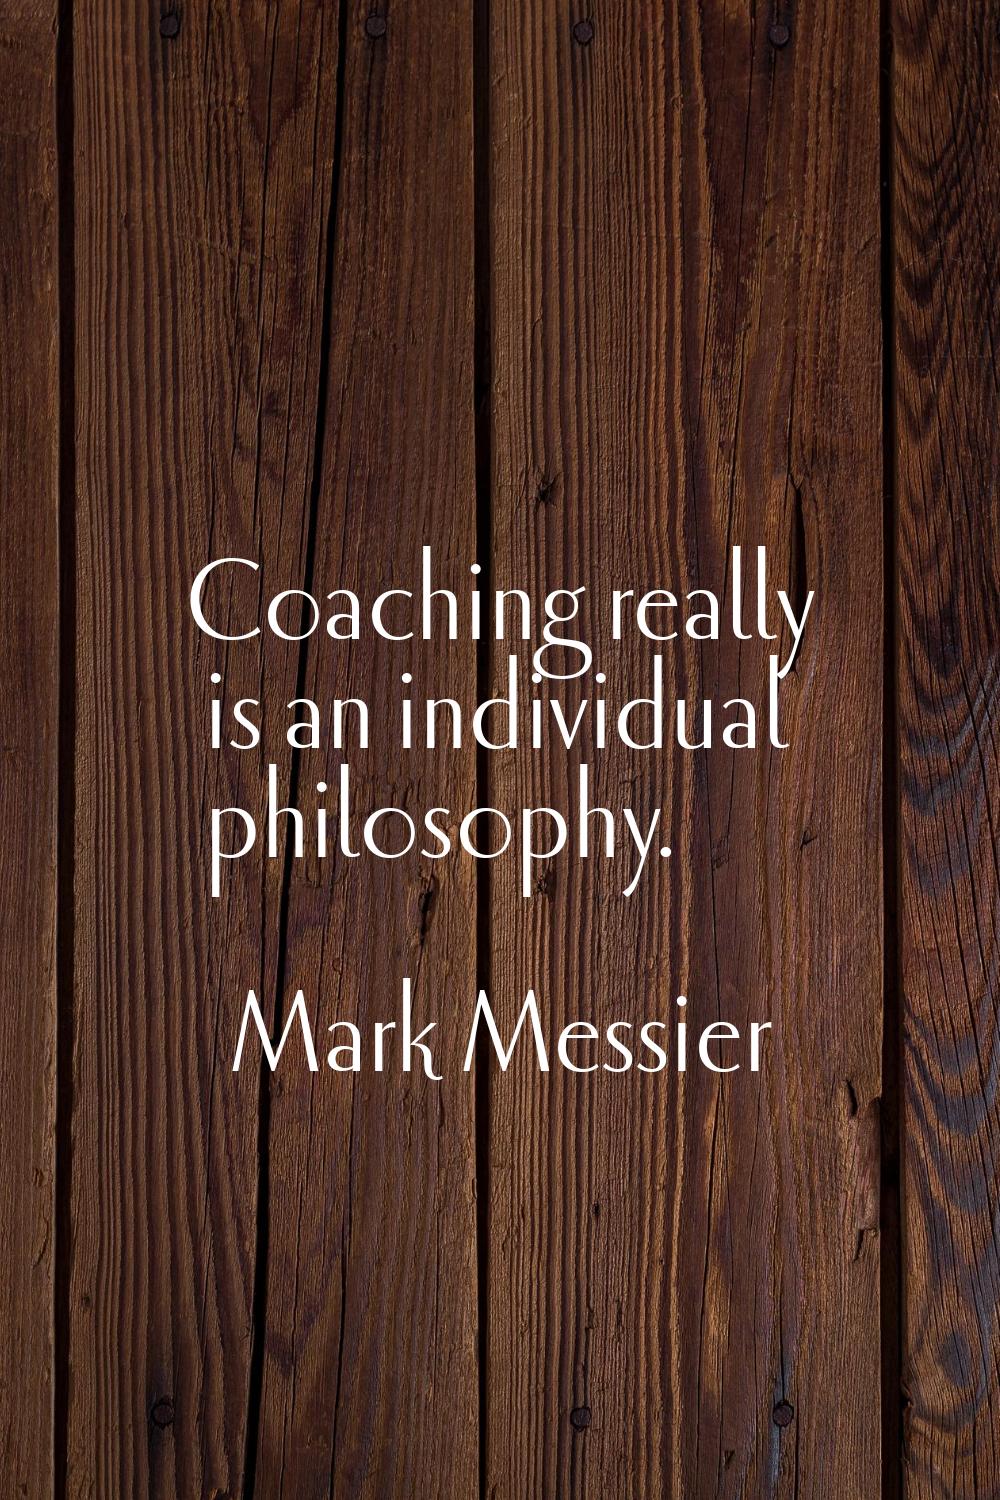 Coaching really is an individual philosophy.